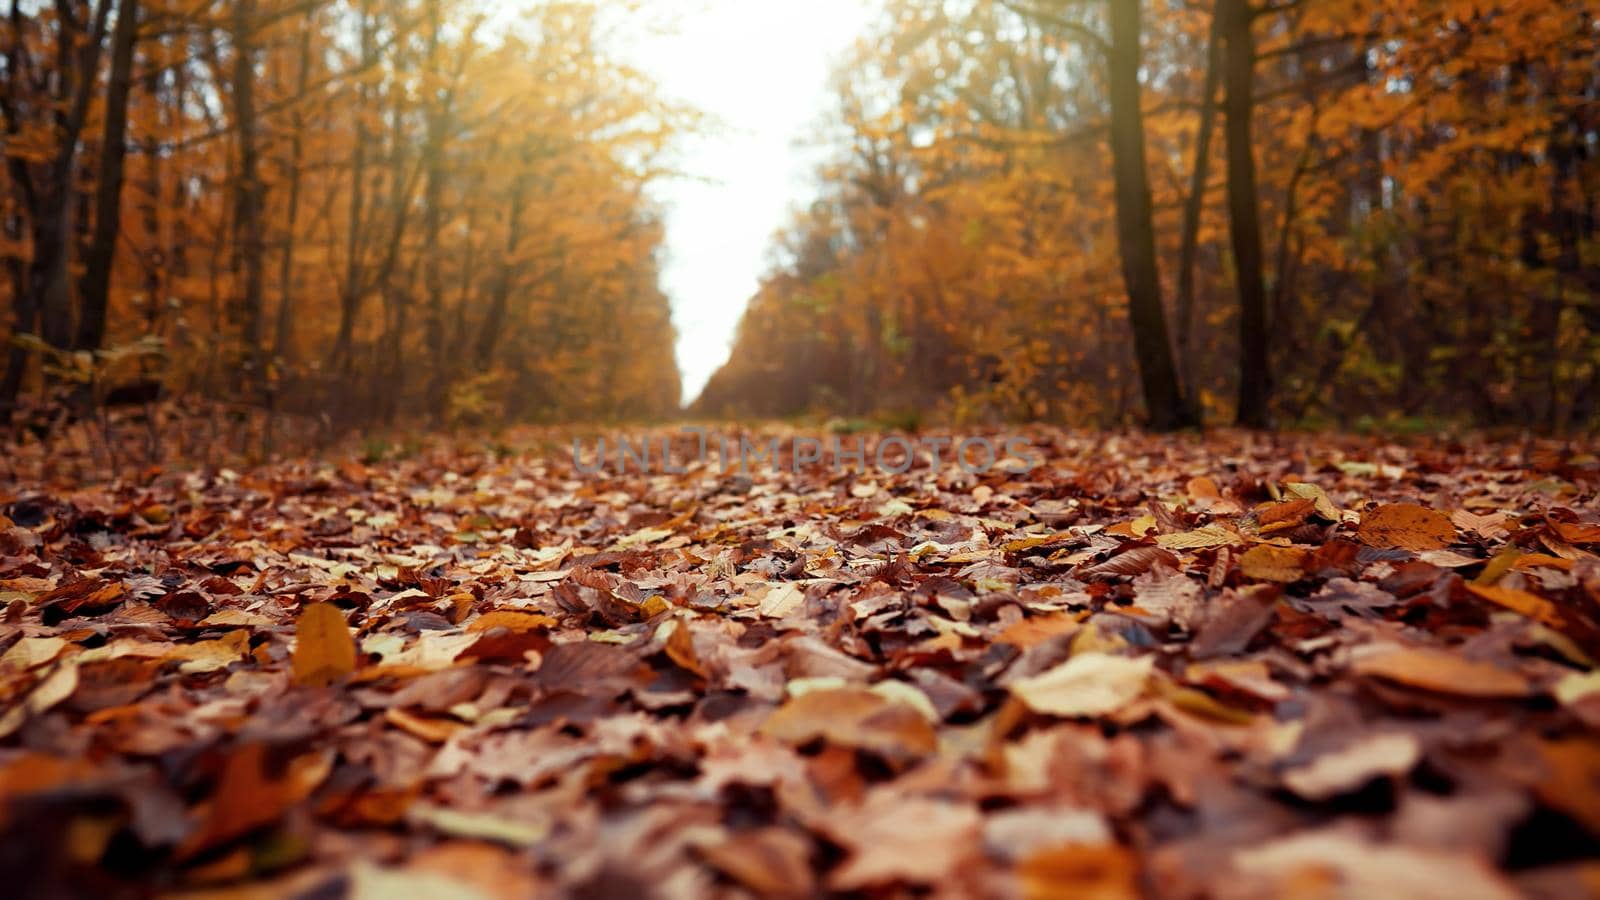 Autumn nature in forest. Falling orange leaves on ground. Fall landscape by kristina_kokhanova